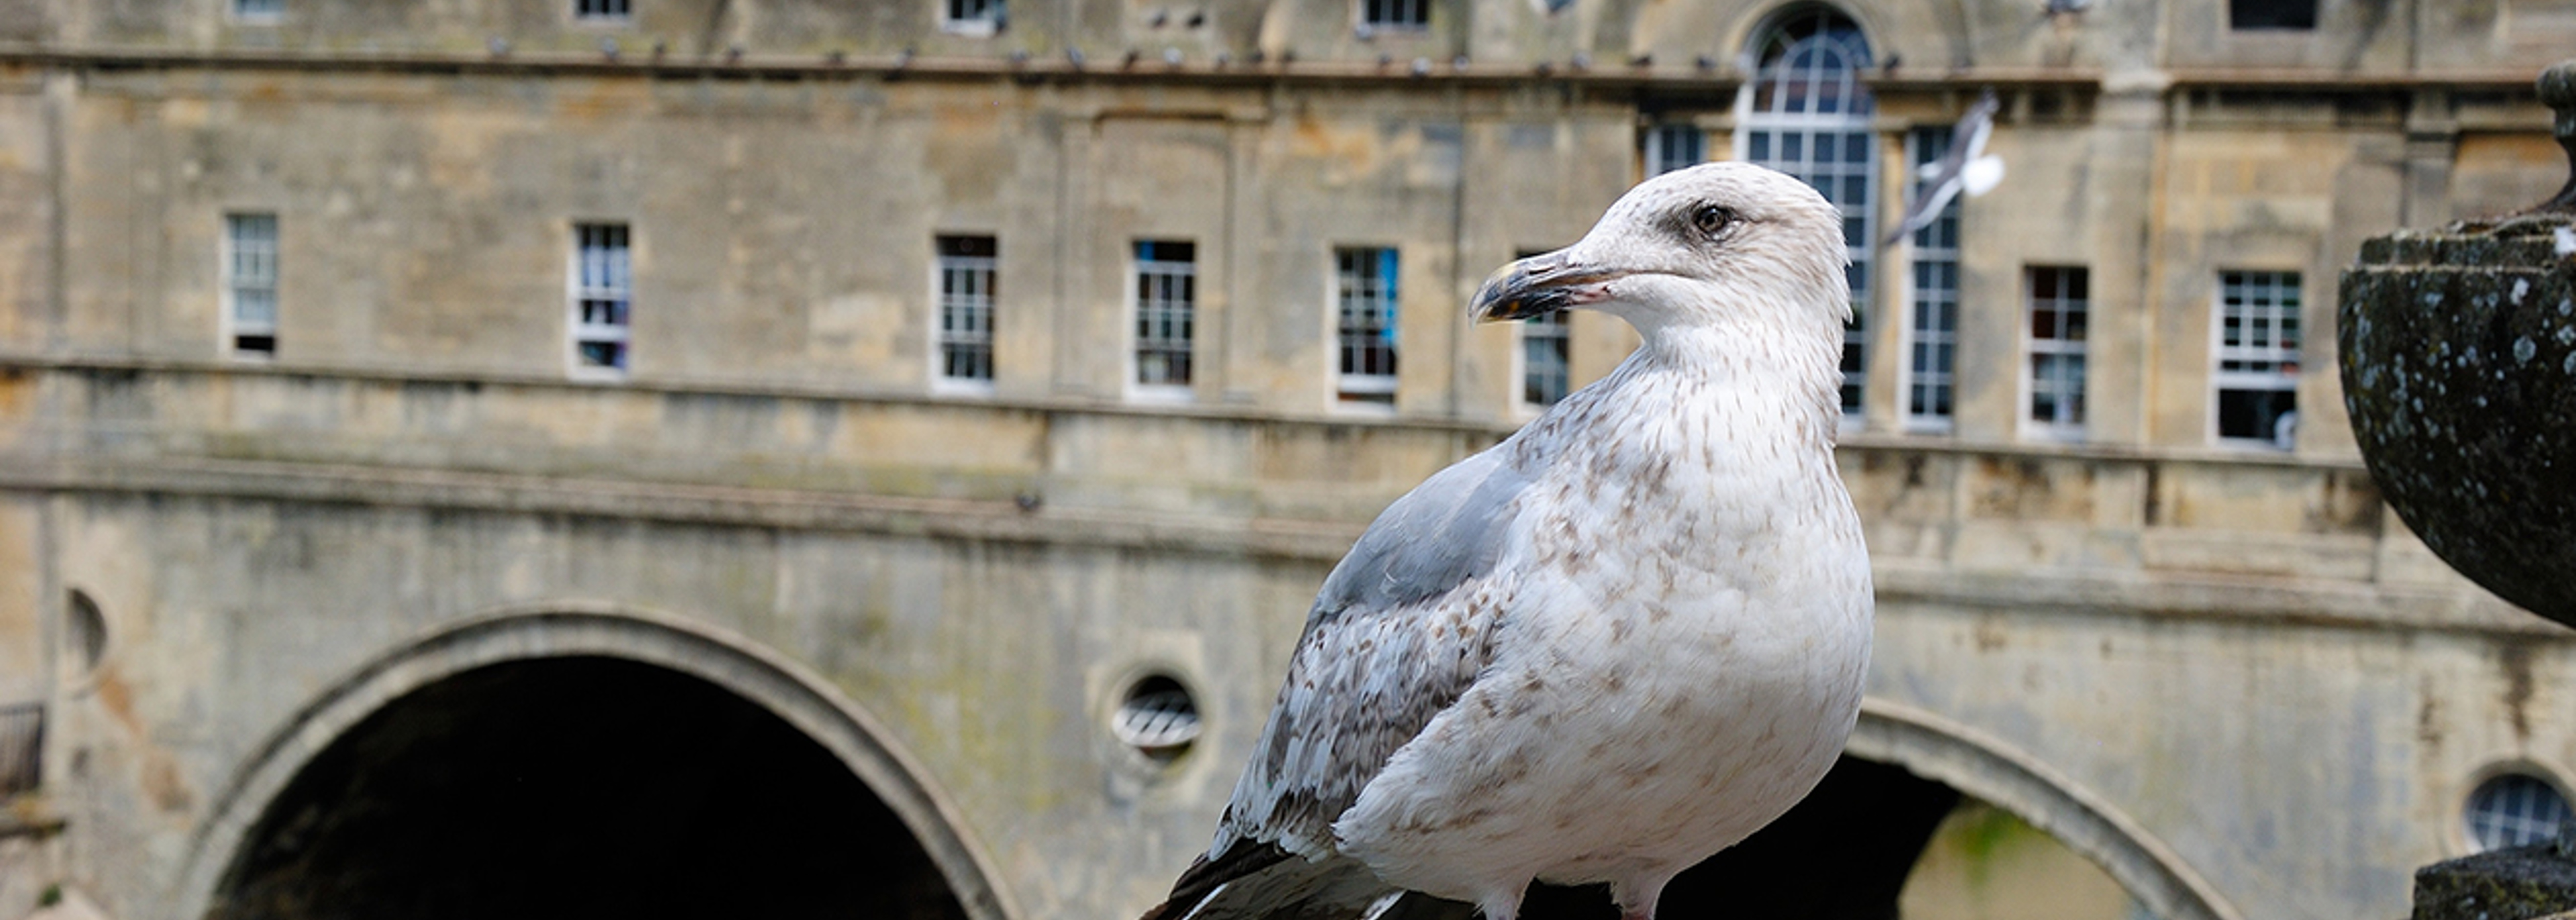 'Non-lethal’ gull deterrent is not enough, say Bath politicians